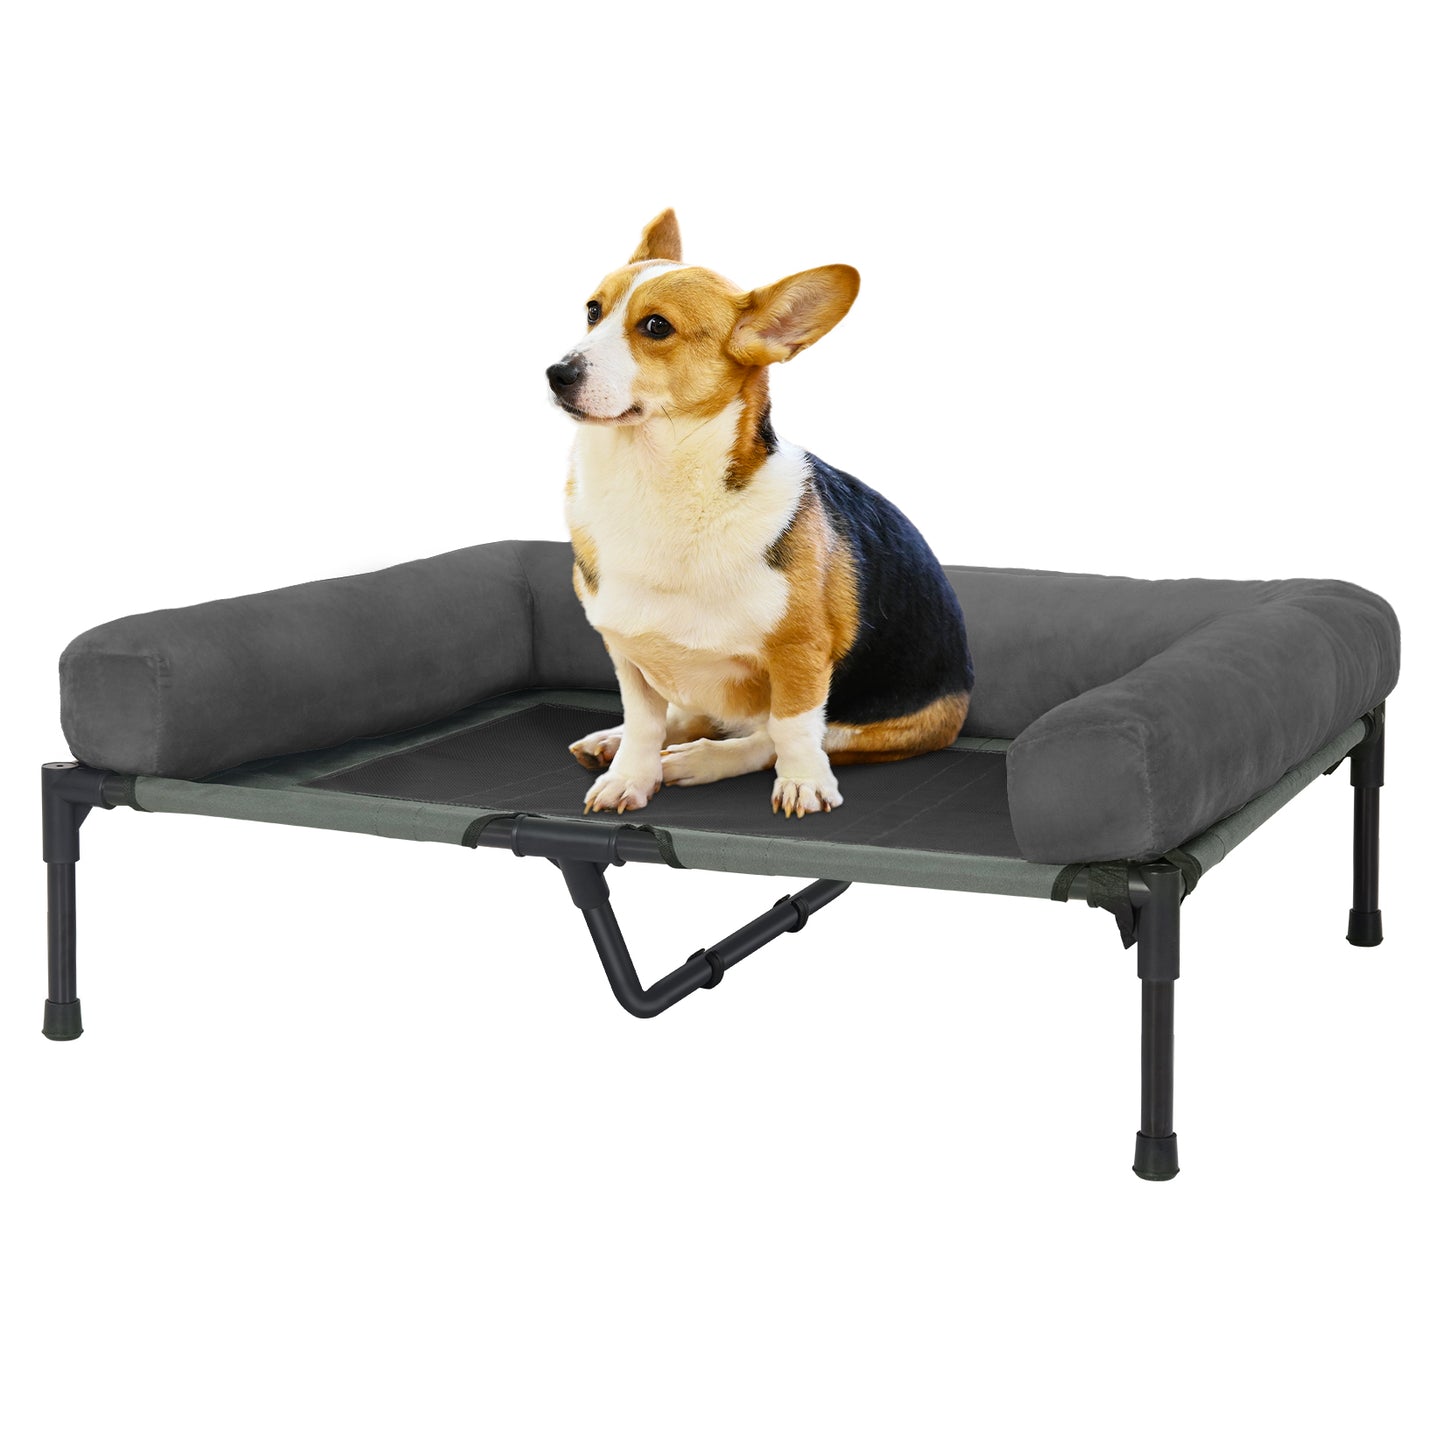 Elevated Dog Bed with Detachable Plush Bolster Outdoor Summer Cooling Raised Dogs Pet Lounger Bed Mesh Cot Bedding